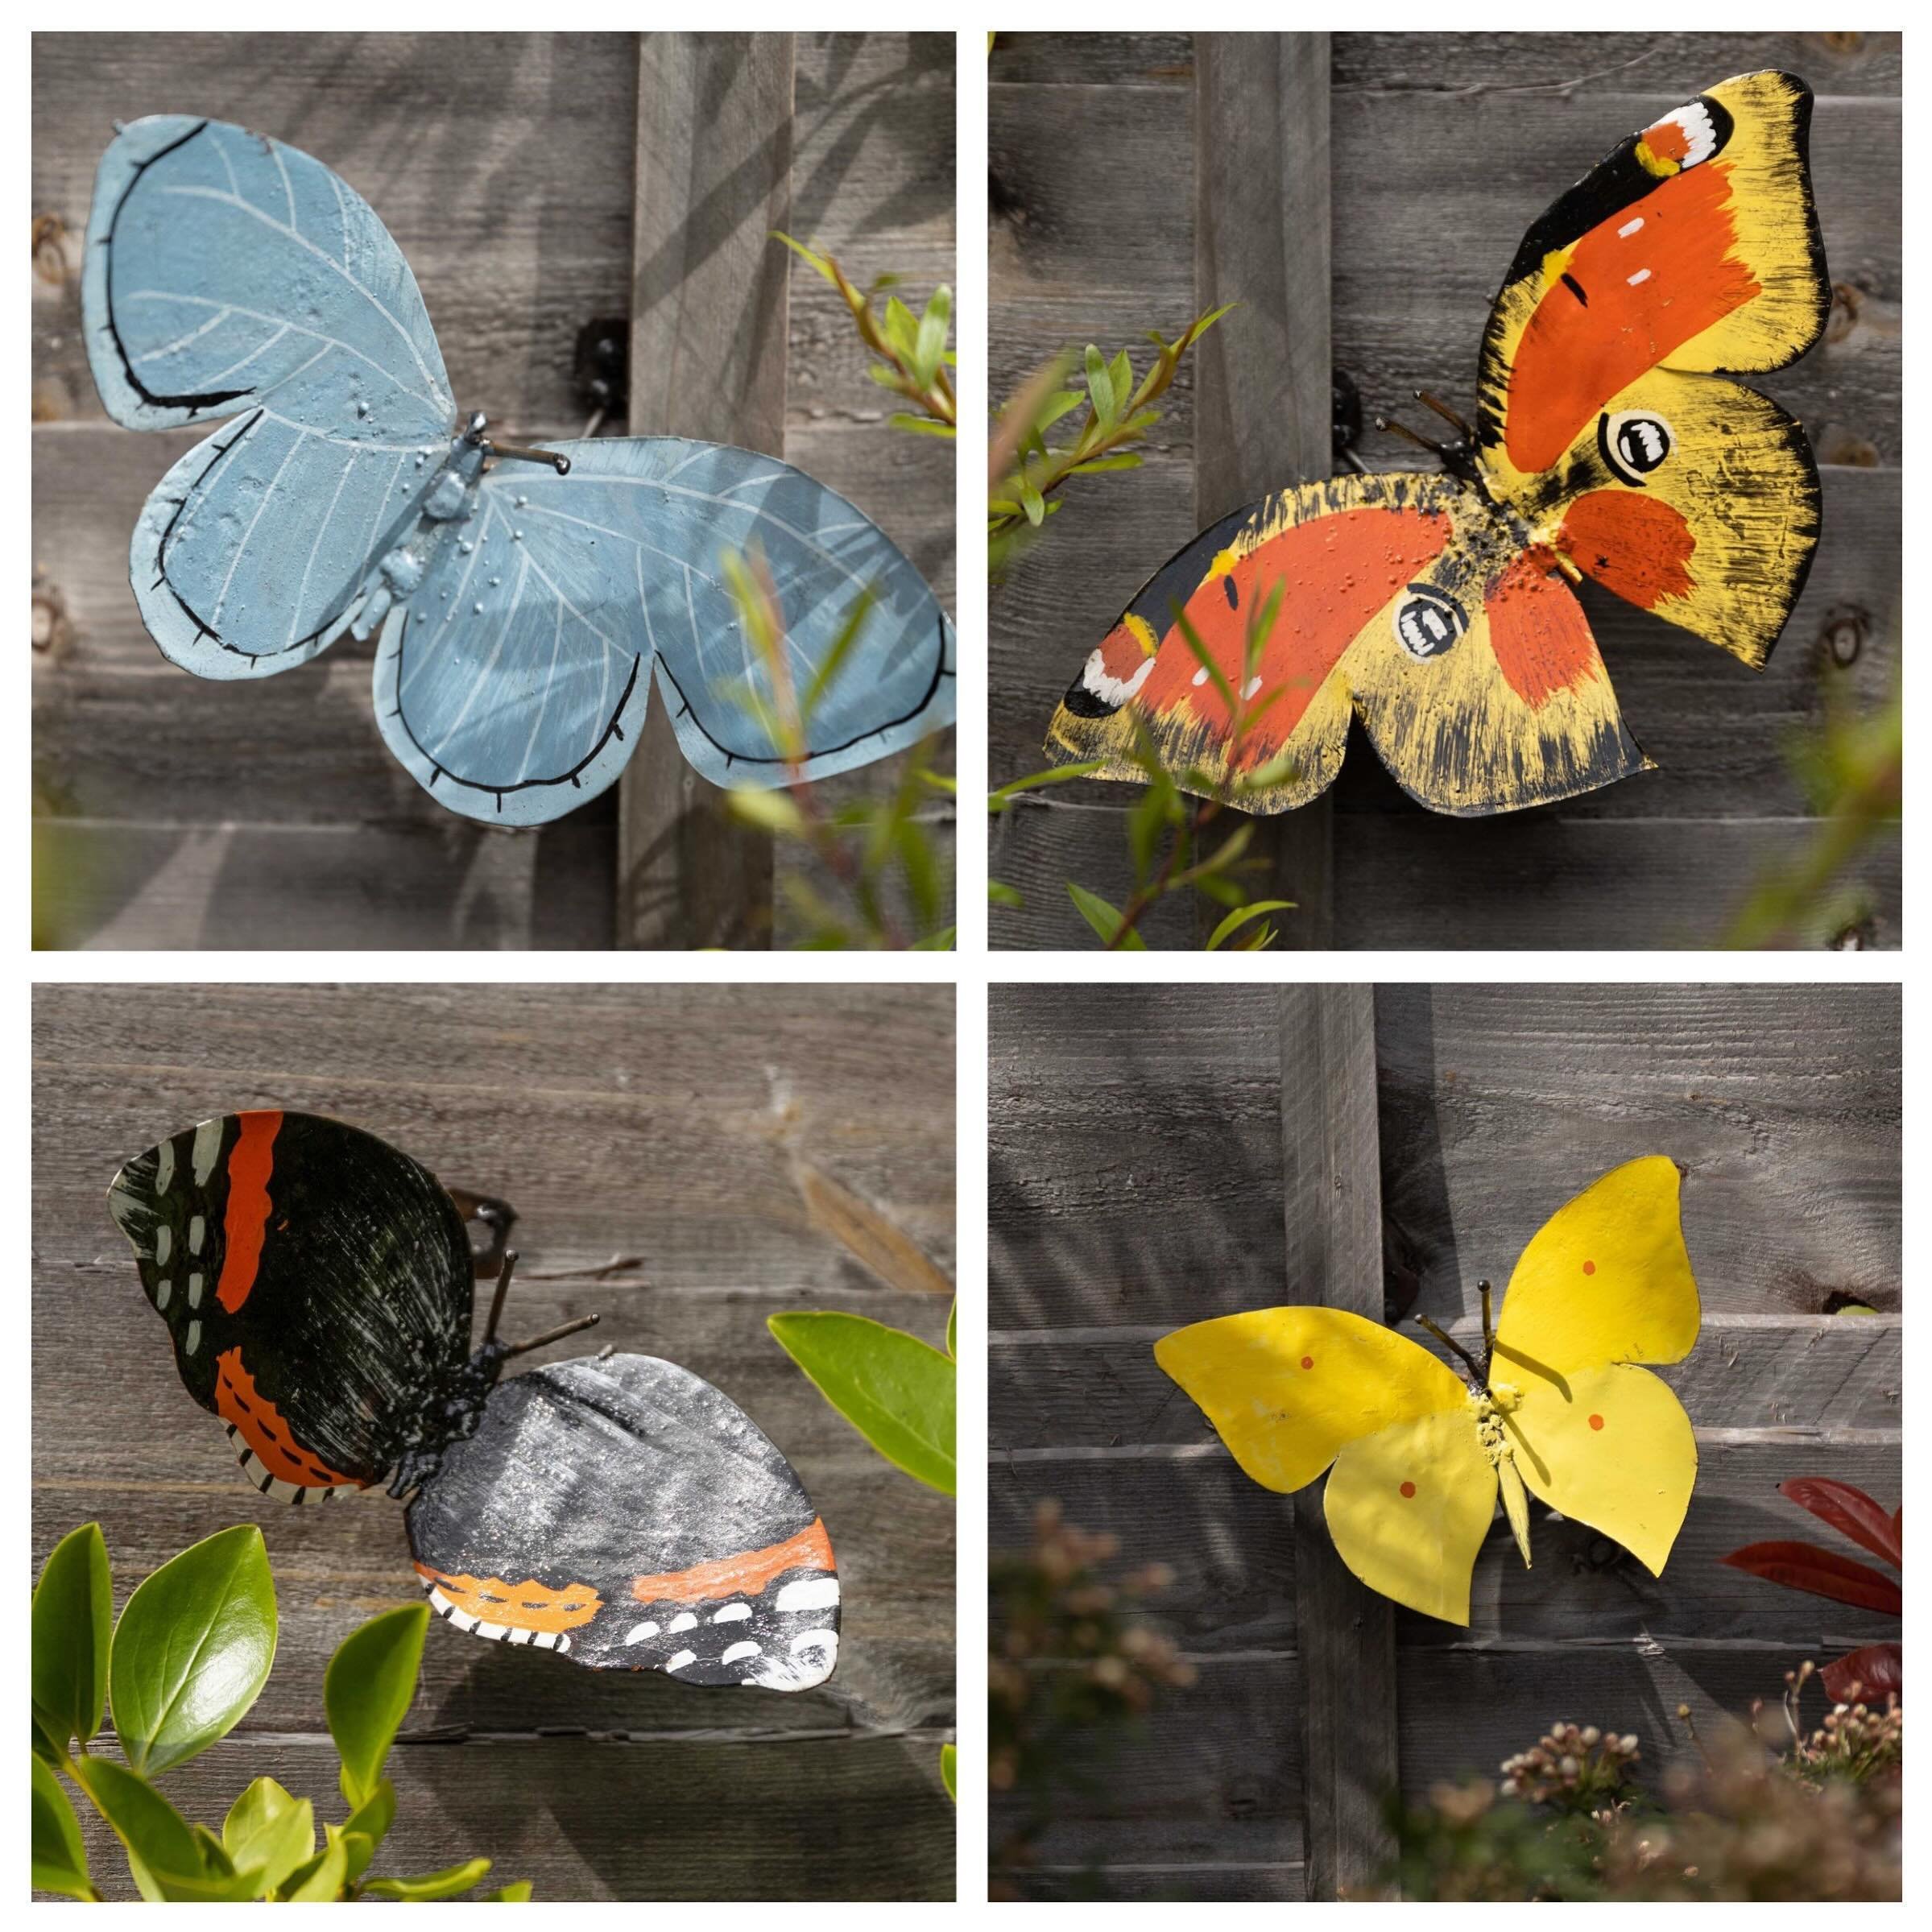 Recycled metal butterflies. Perfect for any garden wall or fence. Choose from #redadmiralbutterfly #peacockbutterfly #commonbluebutterfly or #brimstonebutterfly 

#ecofriendlydesign #reclaimed #reused #recycled #gardensculptures #sustainable